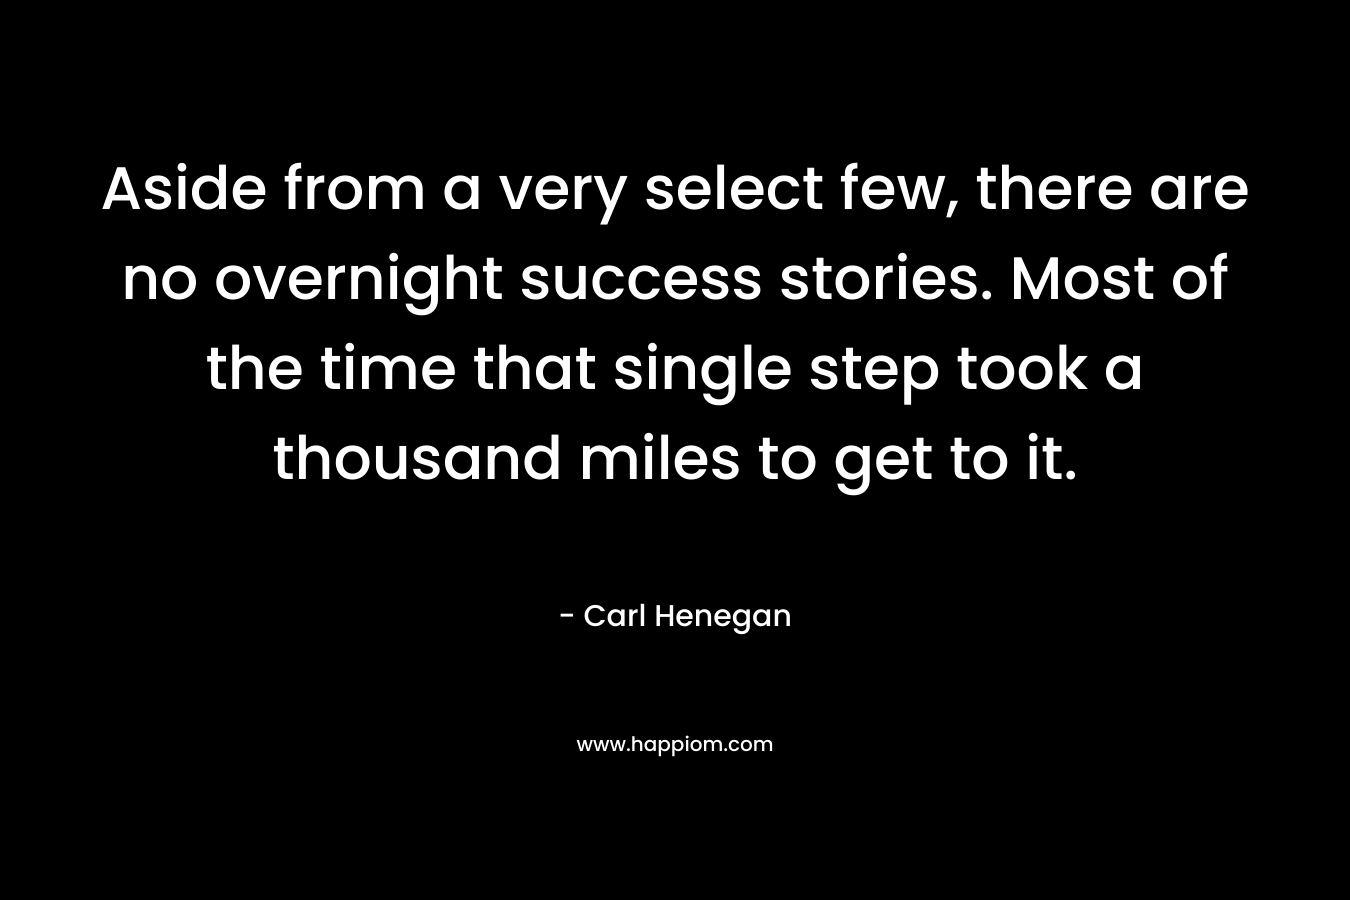 Aside from a very select few, there are no overnight success stories. Most of the time that single step took a thousand miles to get to it. – Carl Henegan